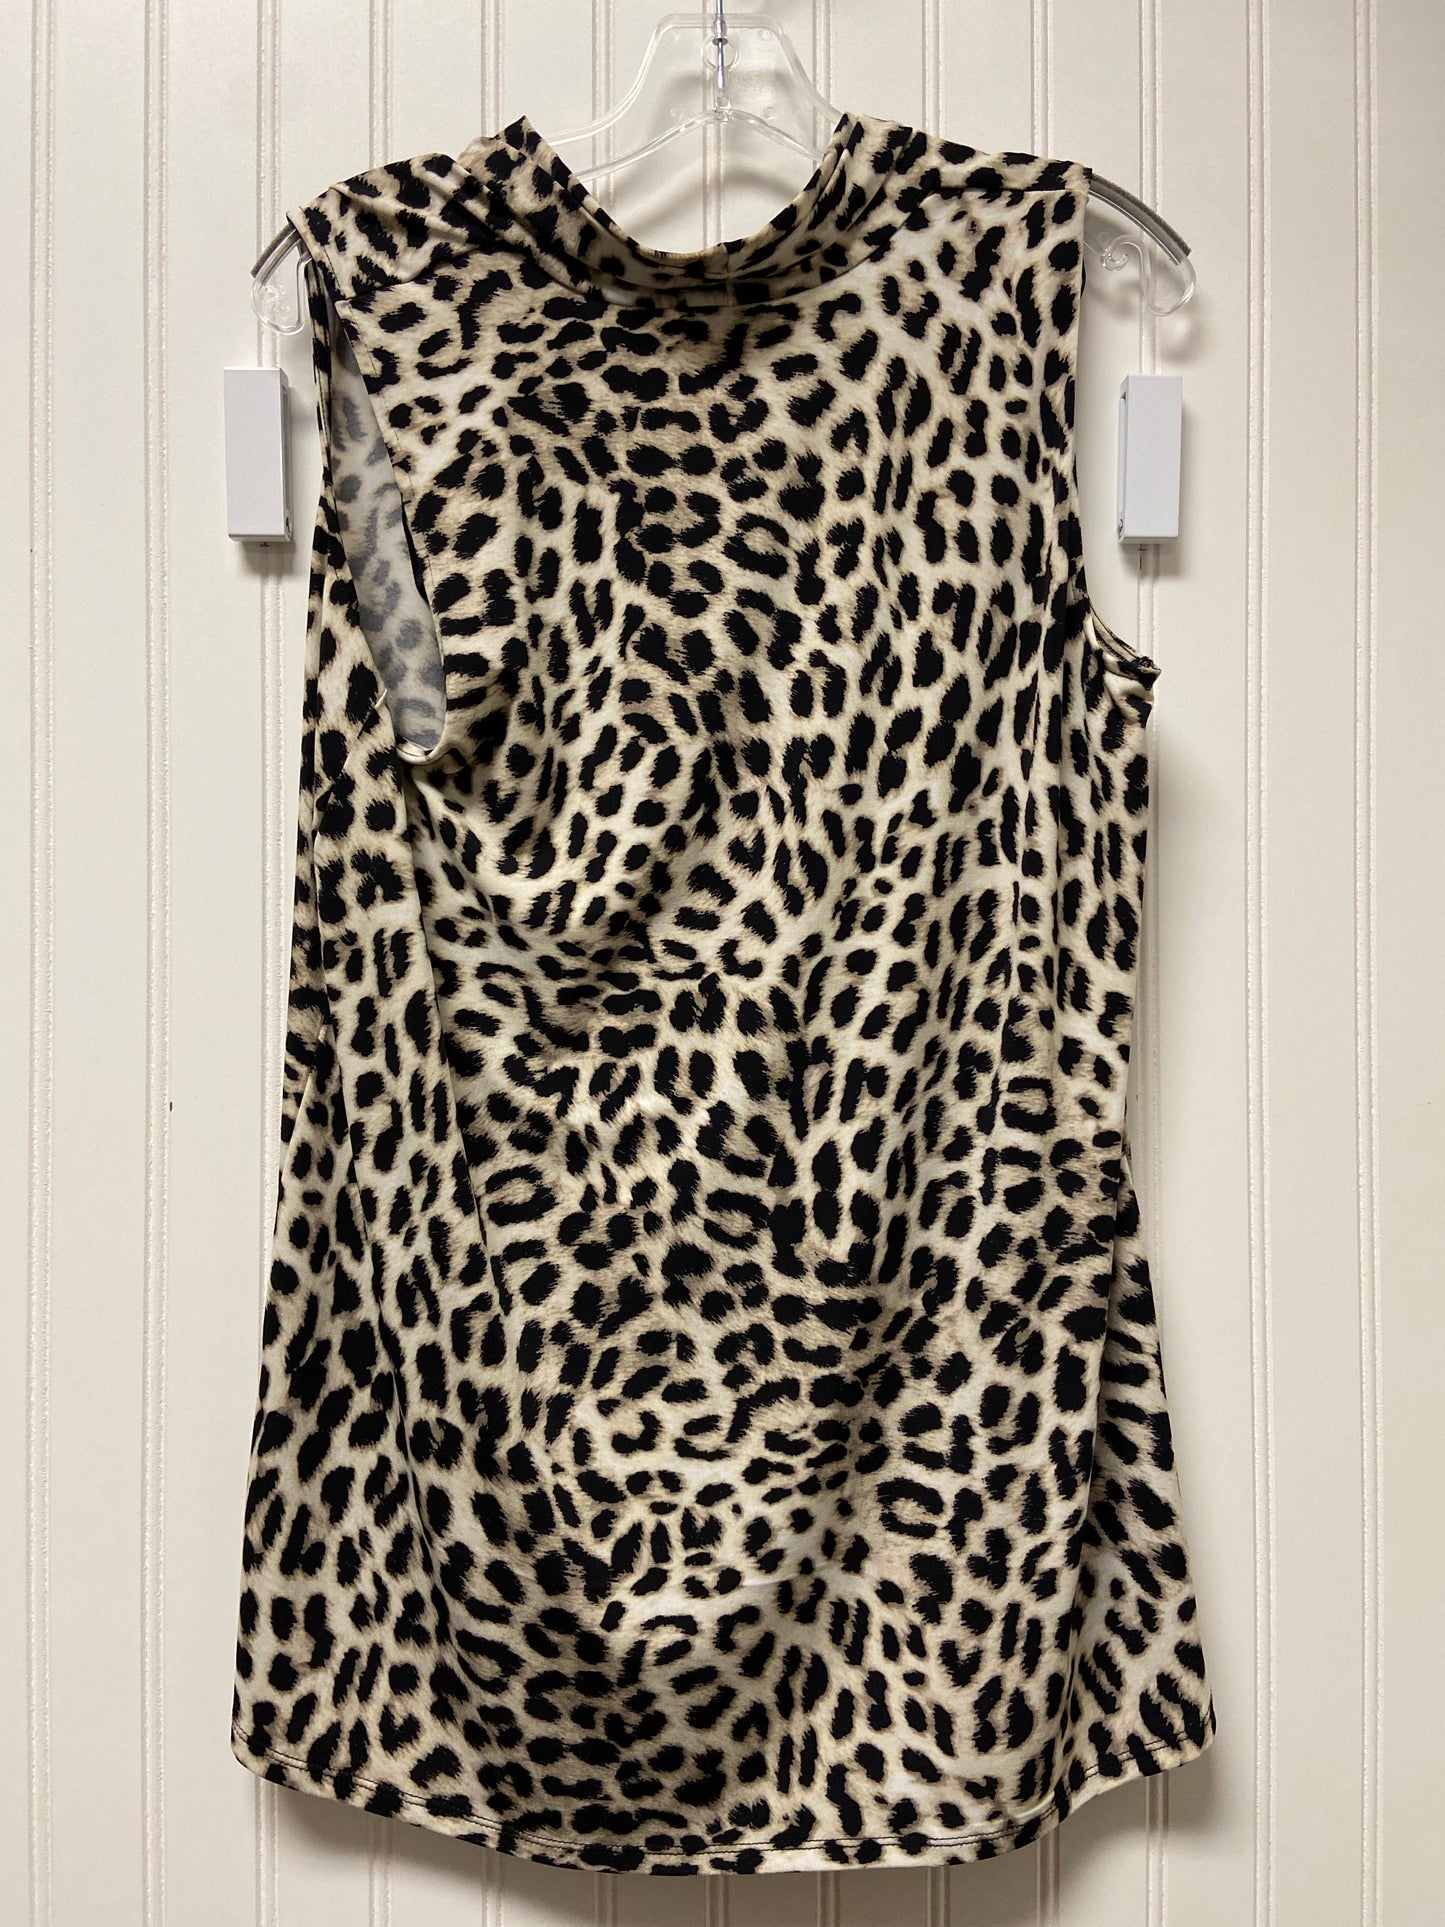 Leopard Print Top Sleeveless Vince Camuto, Size M